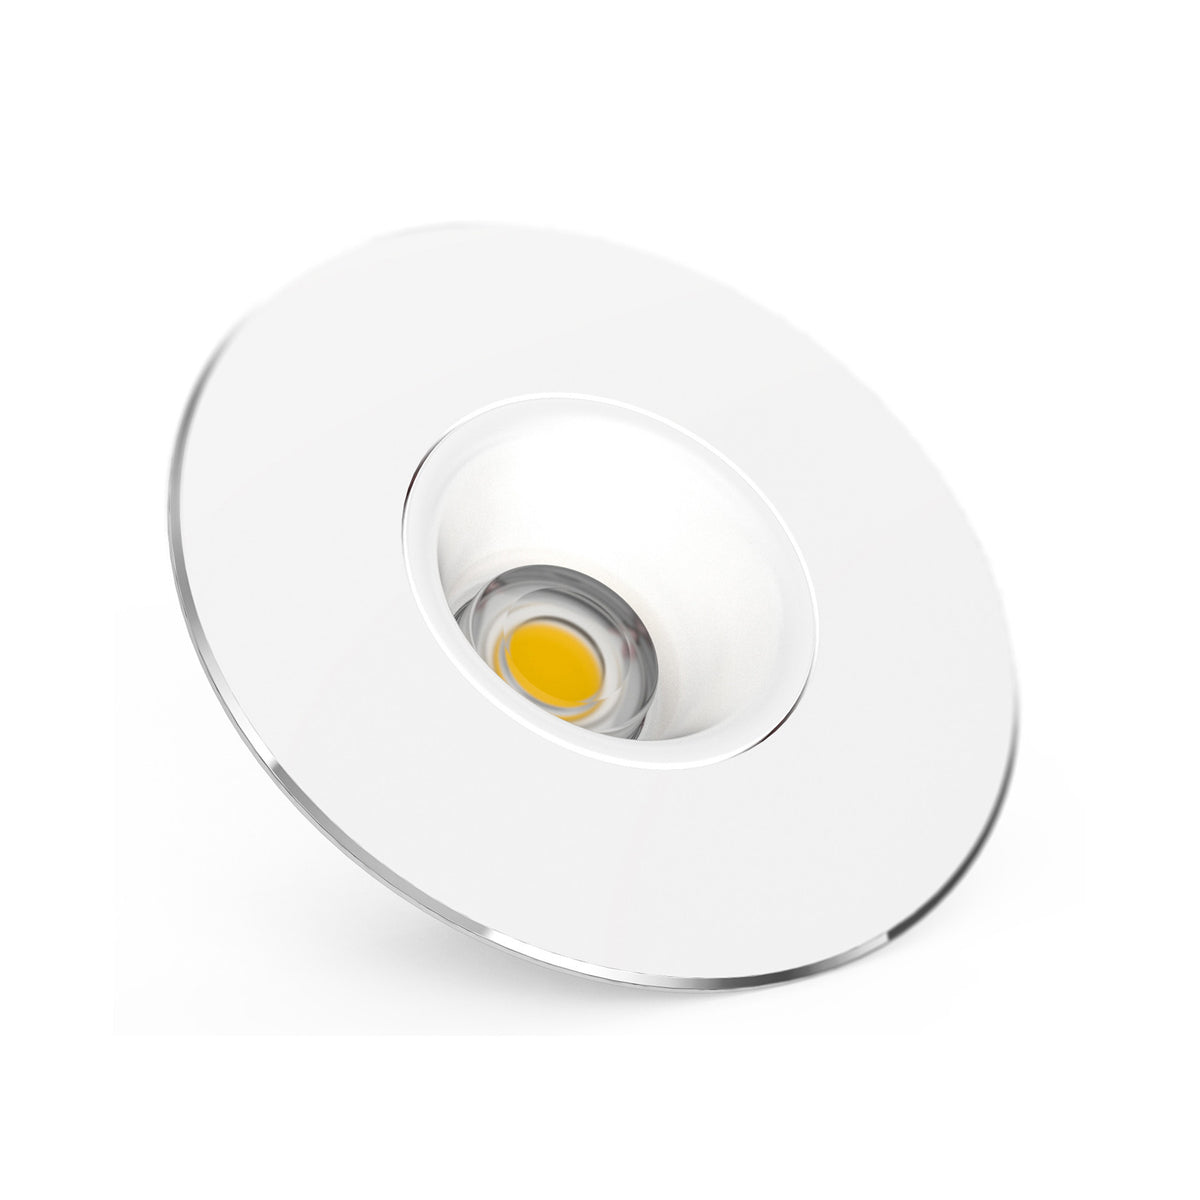 DL1 high performance dimmable LED downlight kit